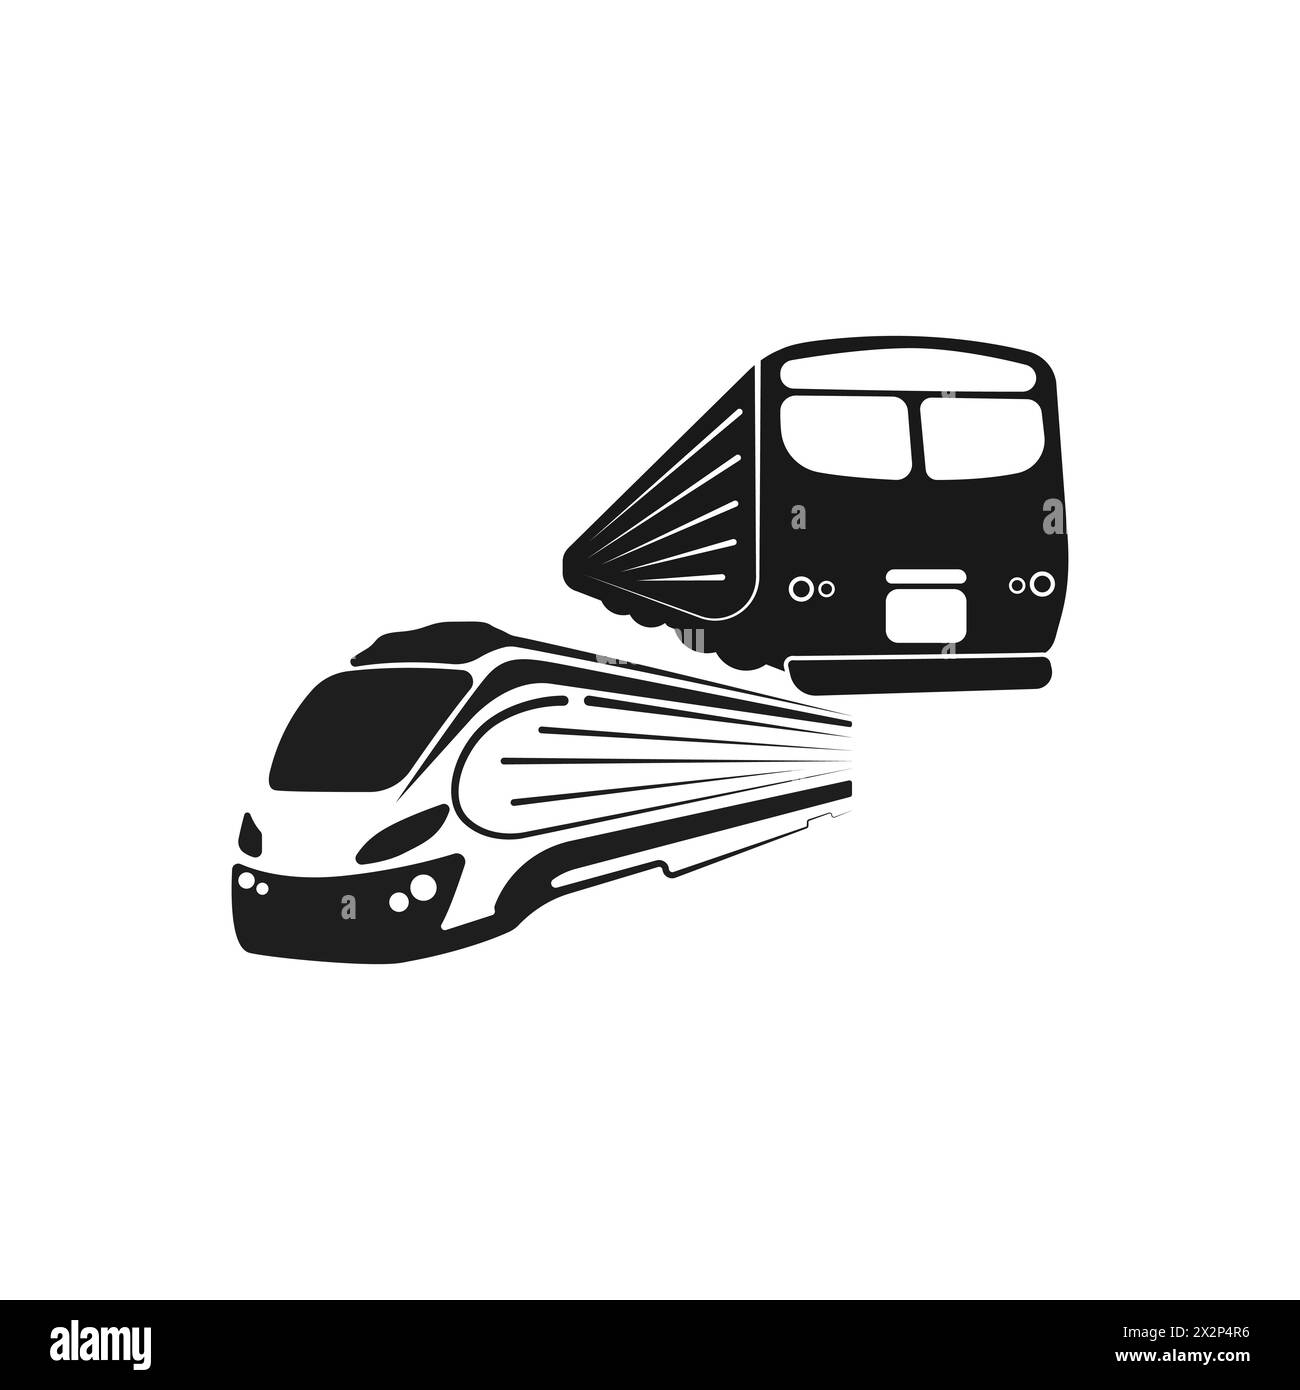 Two train silhouettes for railway companies vector. Railroad logo vector icon. Crossing of trains vector. Movement of trains in different directions. Stock Vector